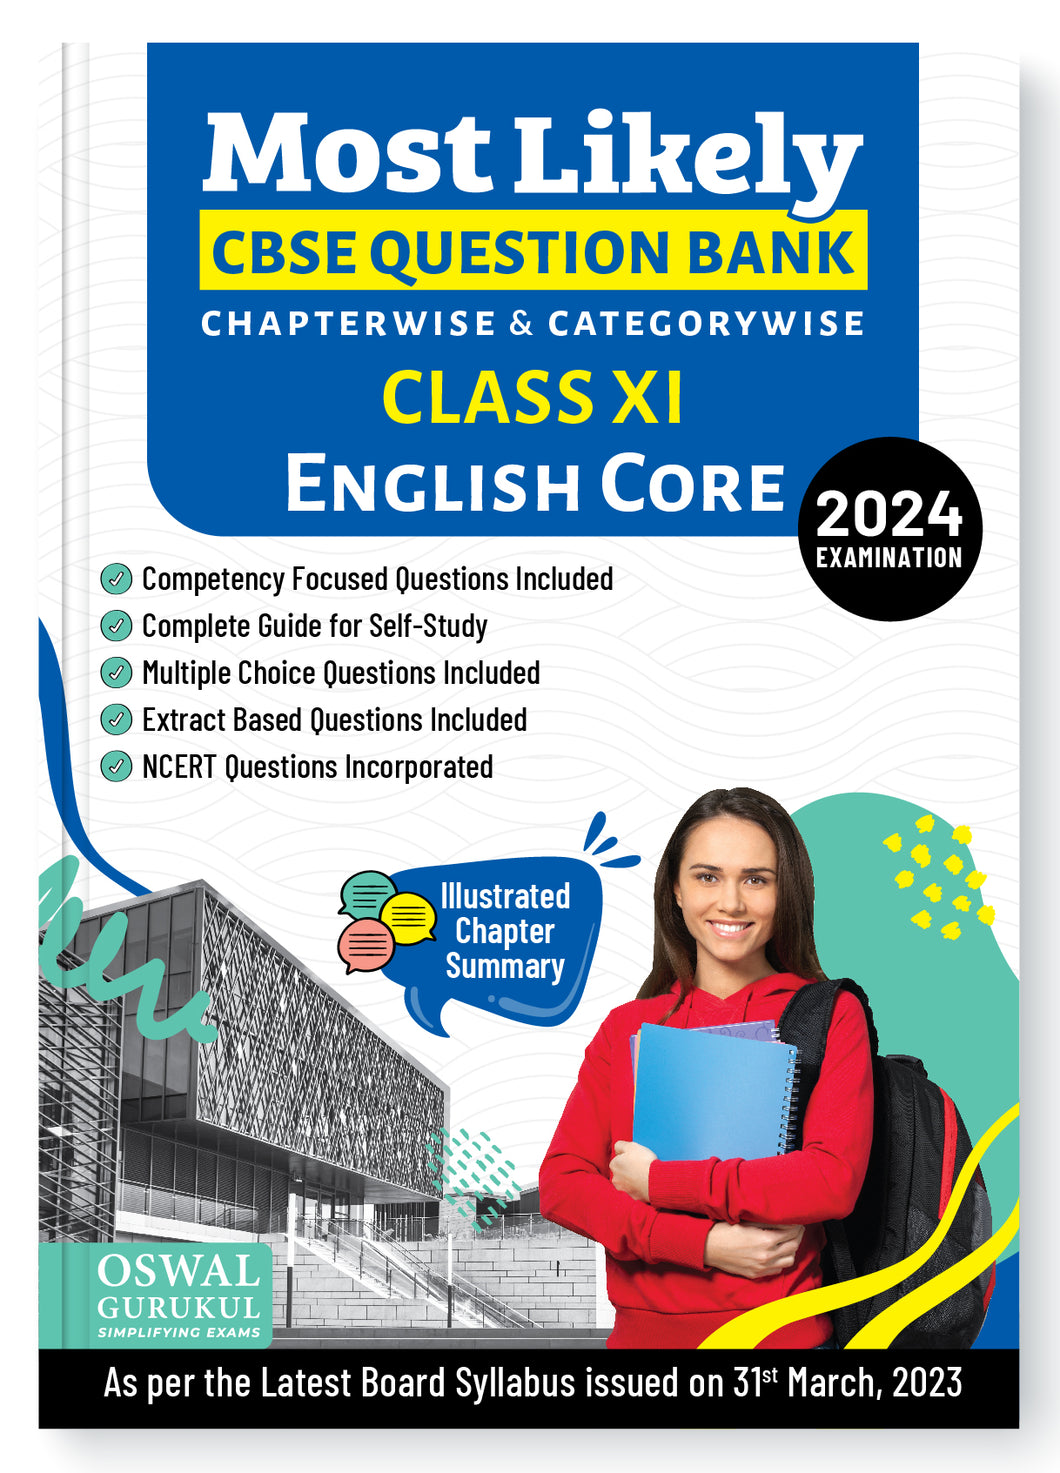 Oswal - Gurukul English Core Most Likely CBSE Question Bank : Class 11 Exam 2024